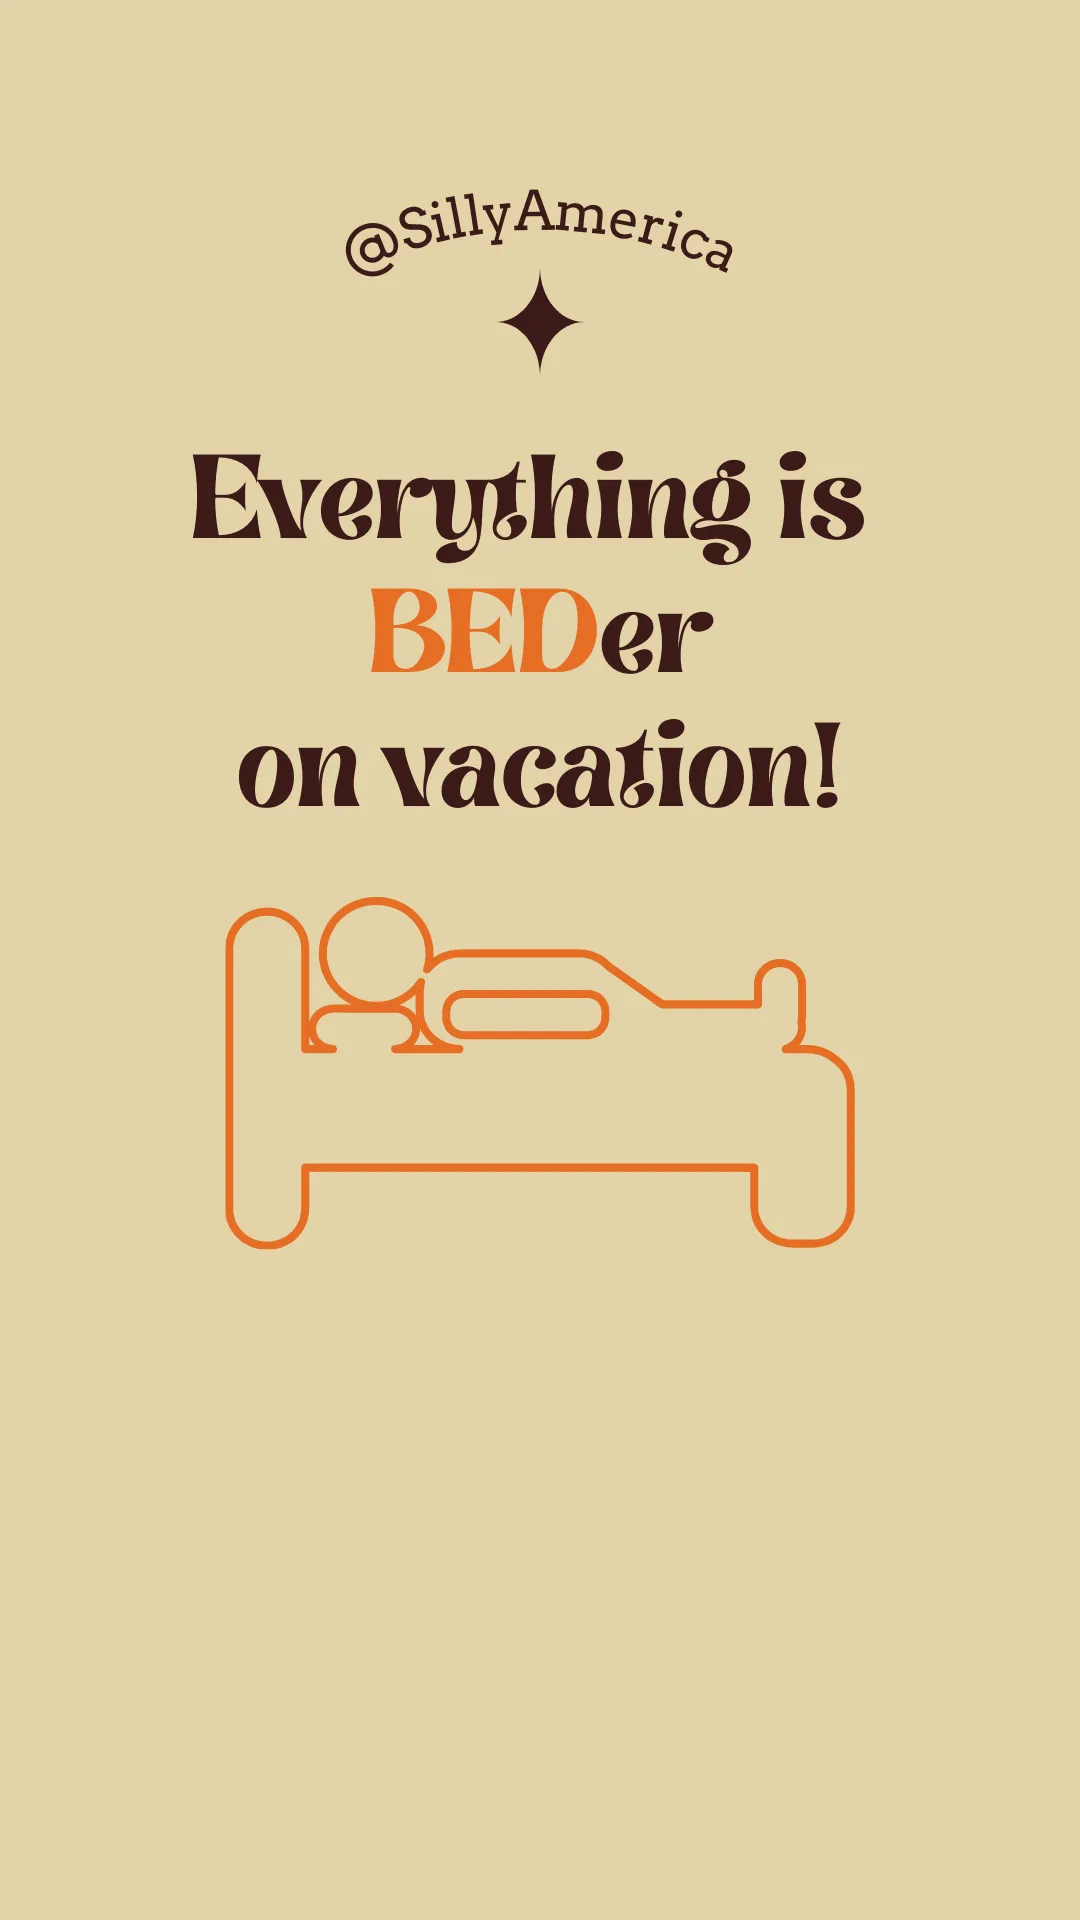 16 Funny Hotel Puns for Social Media - Everything is BEDer on vacation!